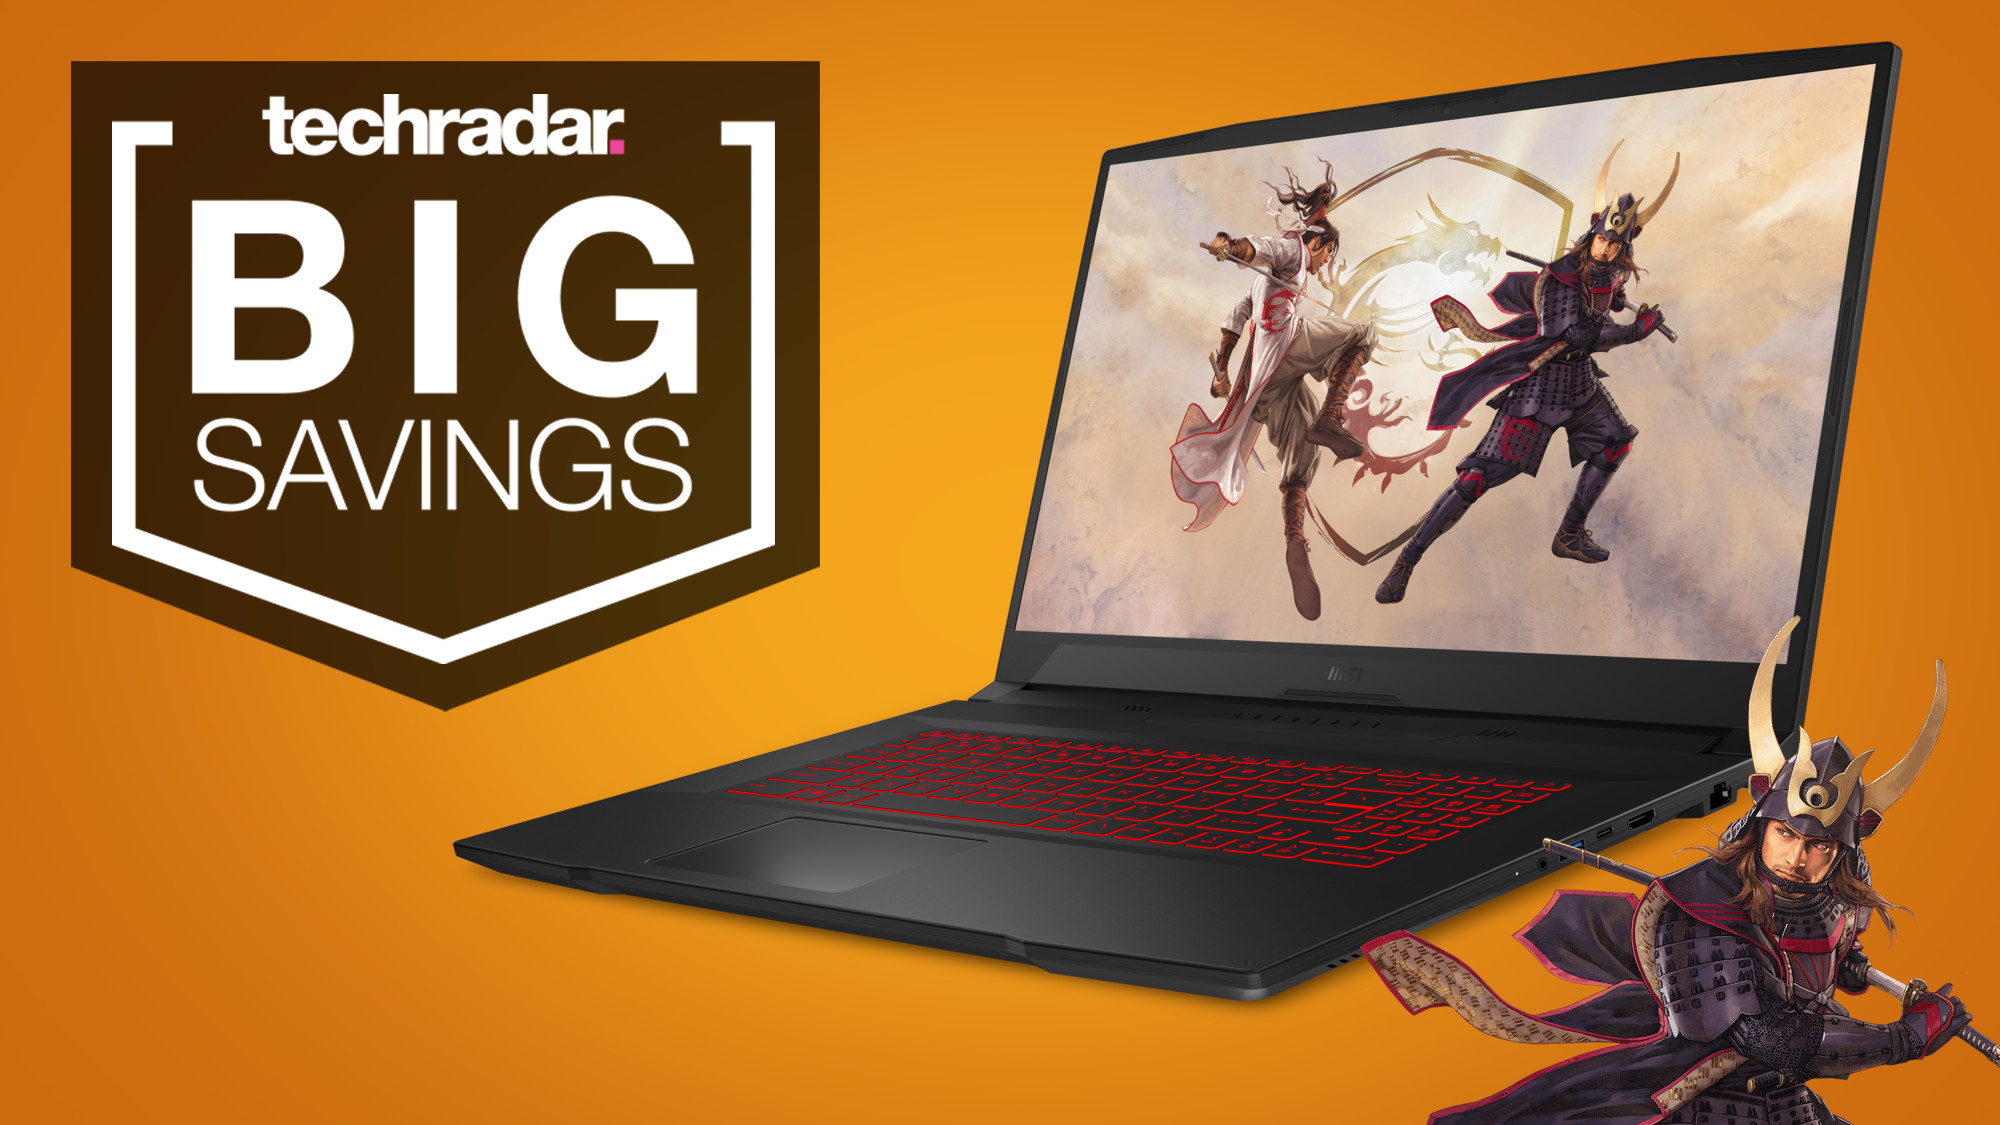 This Early Black Friday Gaming Laptop Deal Comes With A Free Sword Techradar